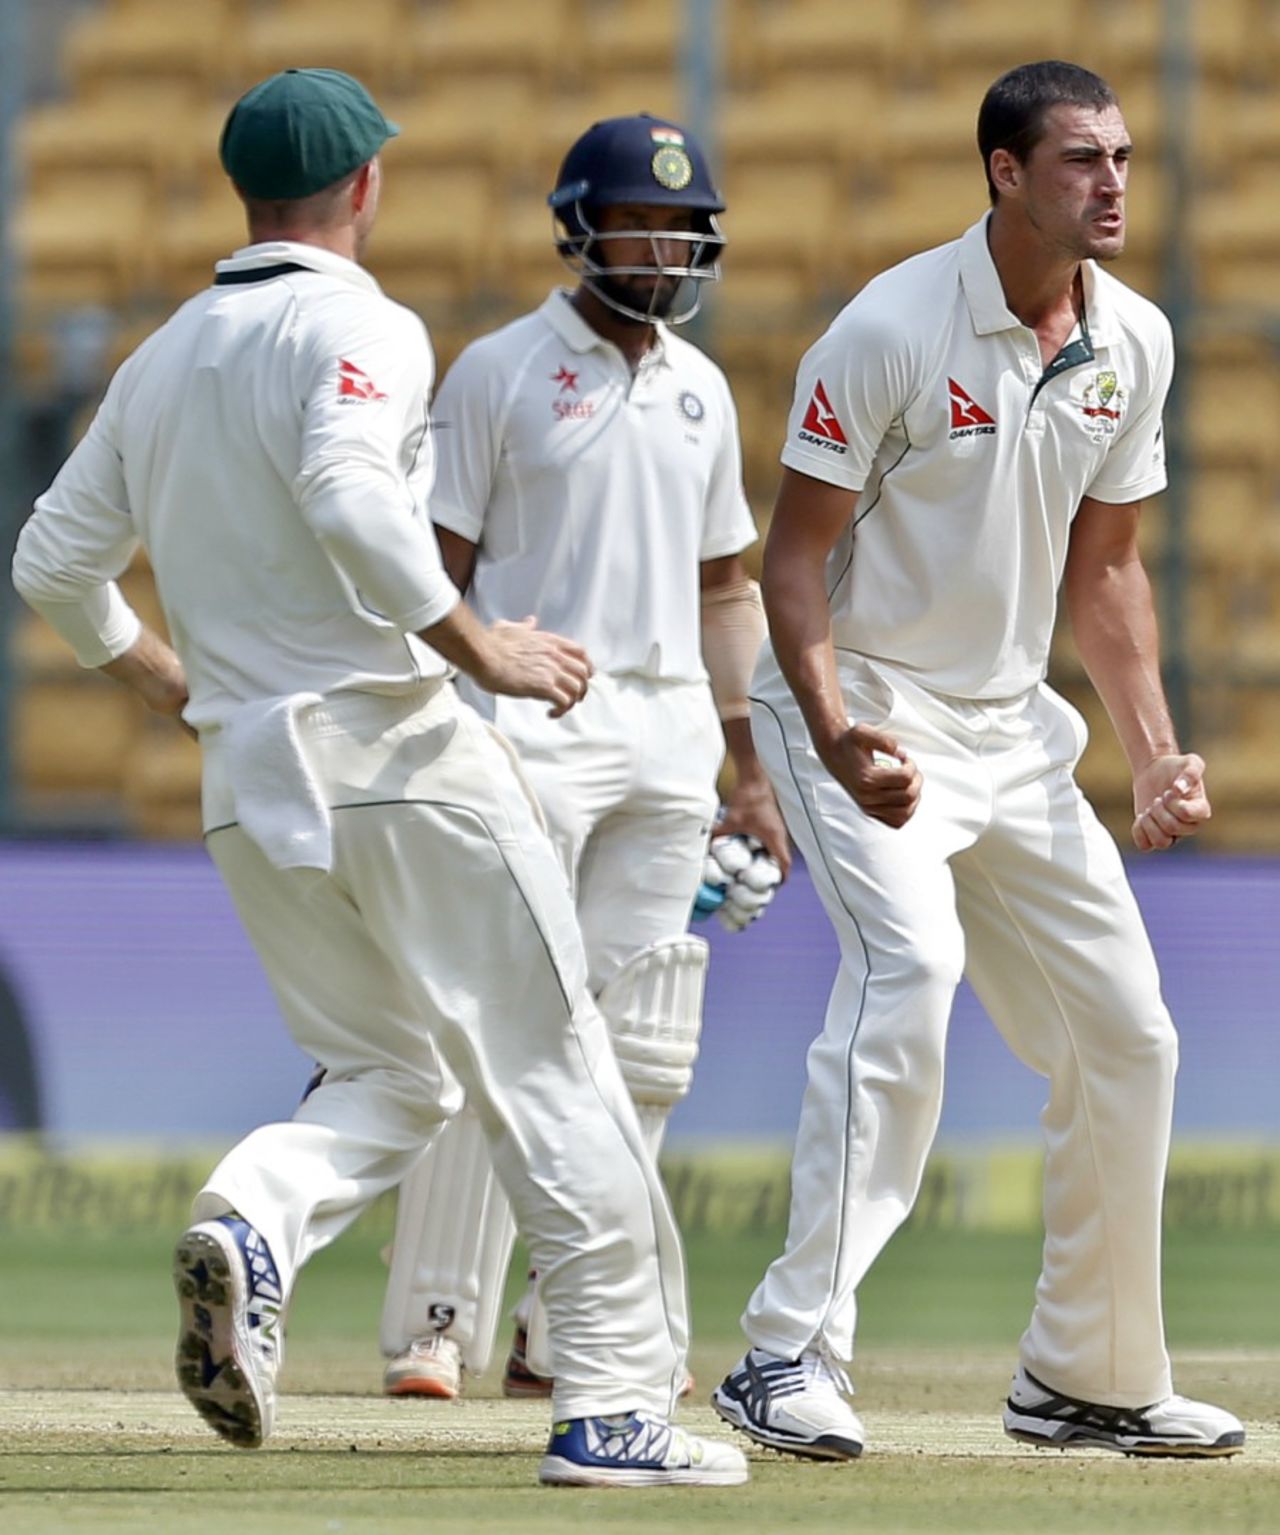 Mitchell Starc roars in delight after a wicket, India v Australia, 2nd Test, Bengaluru, 4th day, March 7, 2017